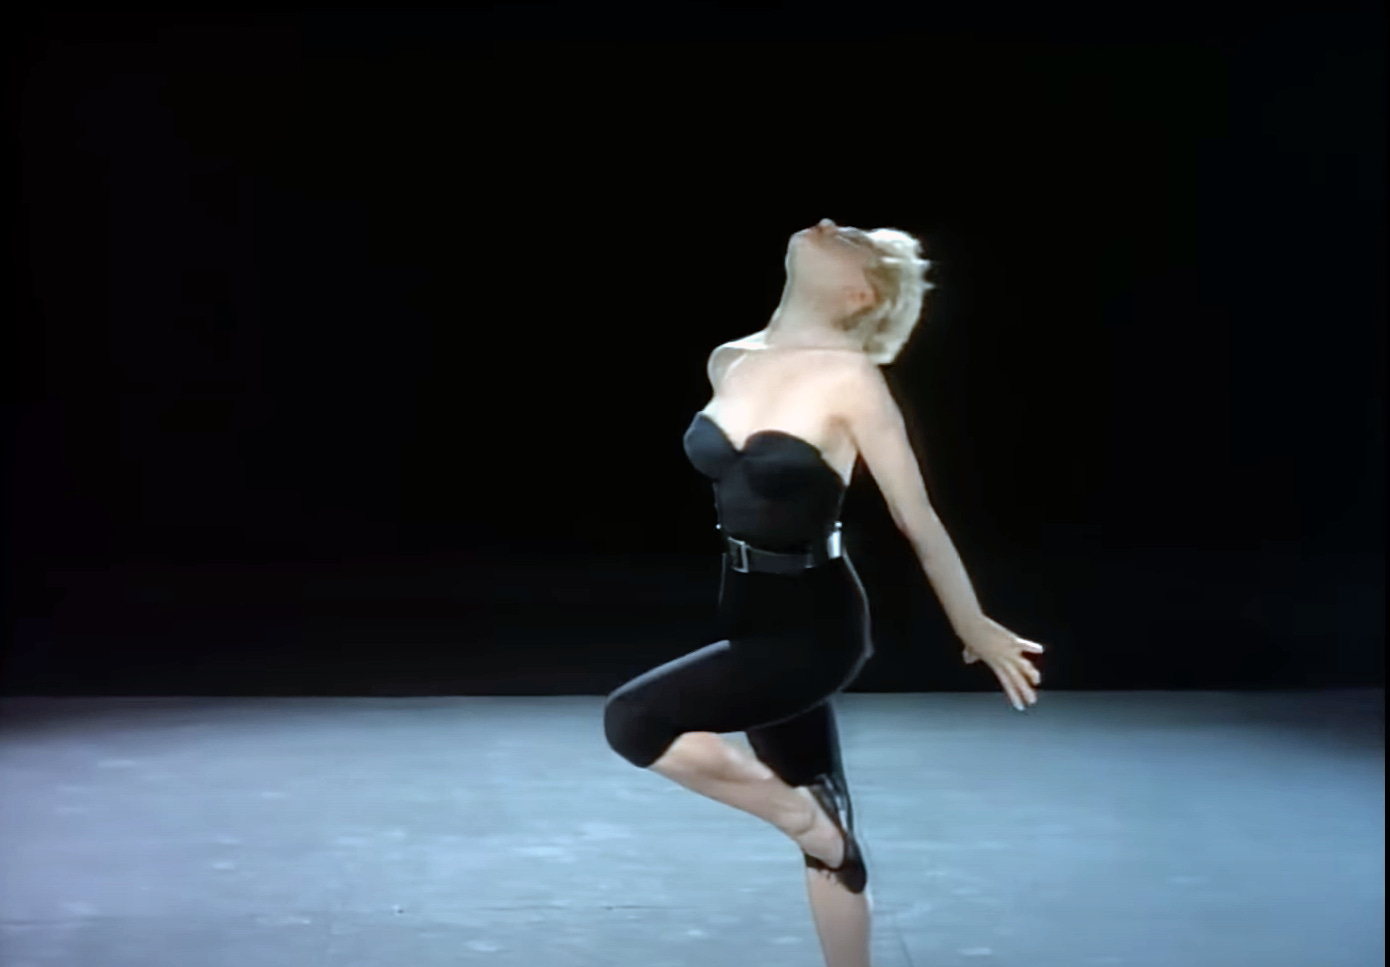 Madonna in the Papa Don't Preach video, dressed in black bustier and capri pants, dancing